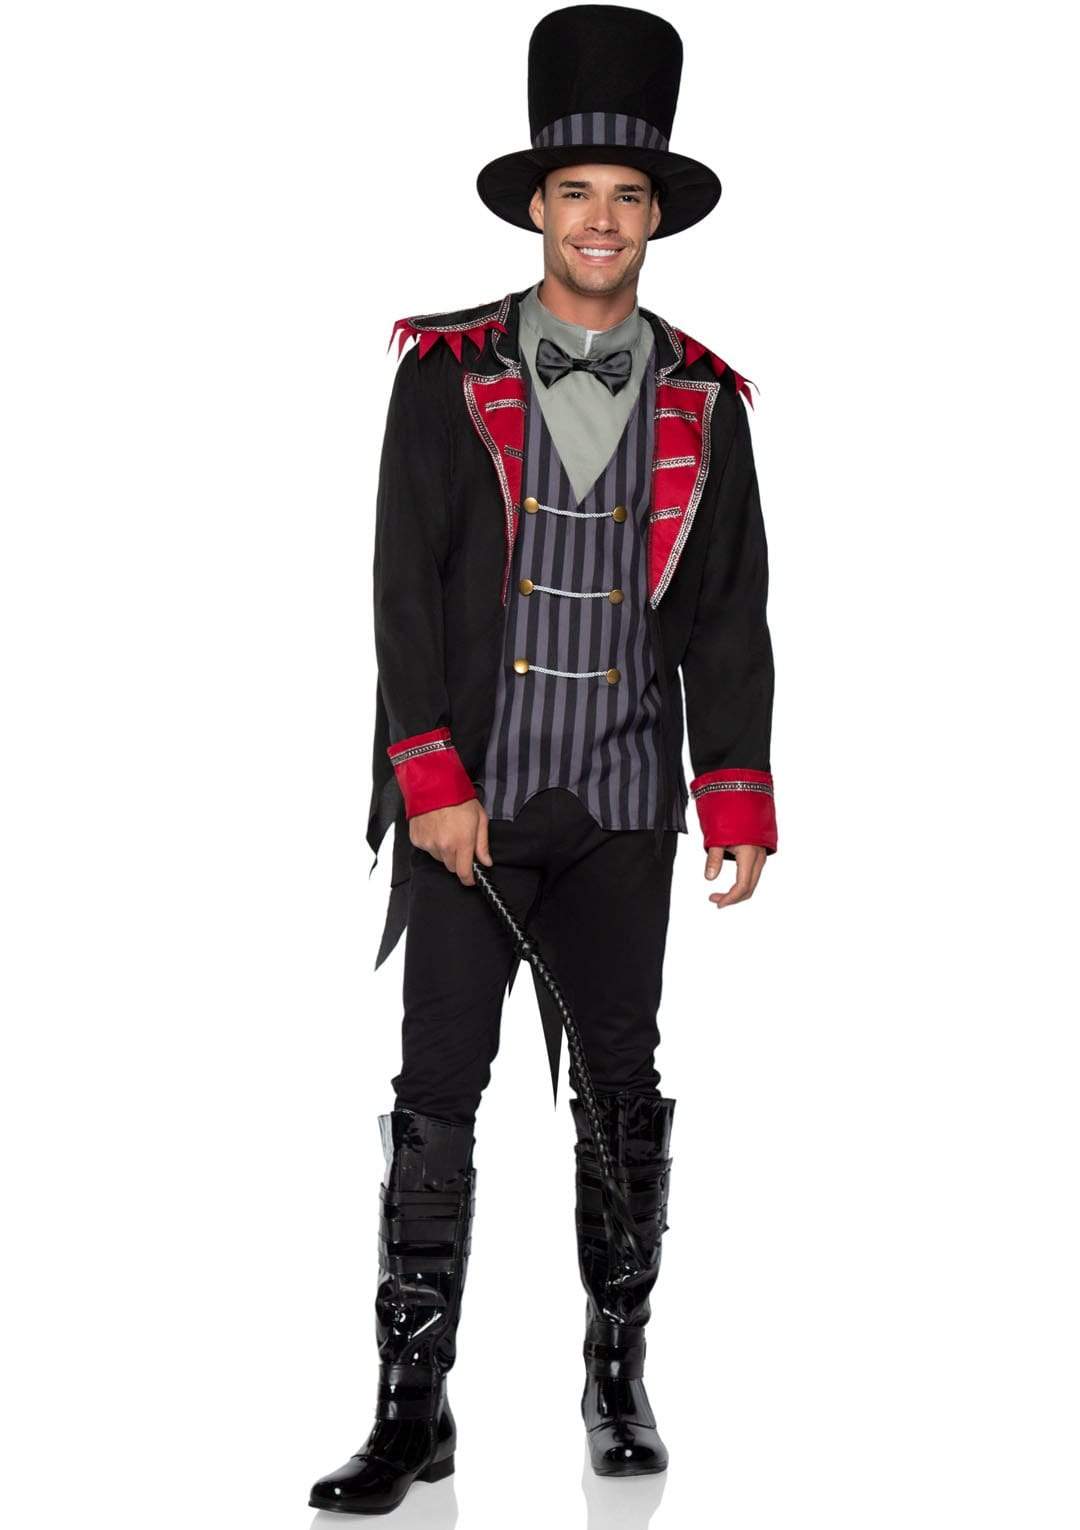 Sinister Ring Master Jacket with Shirt/Vest Combo and Top Hat